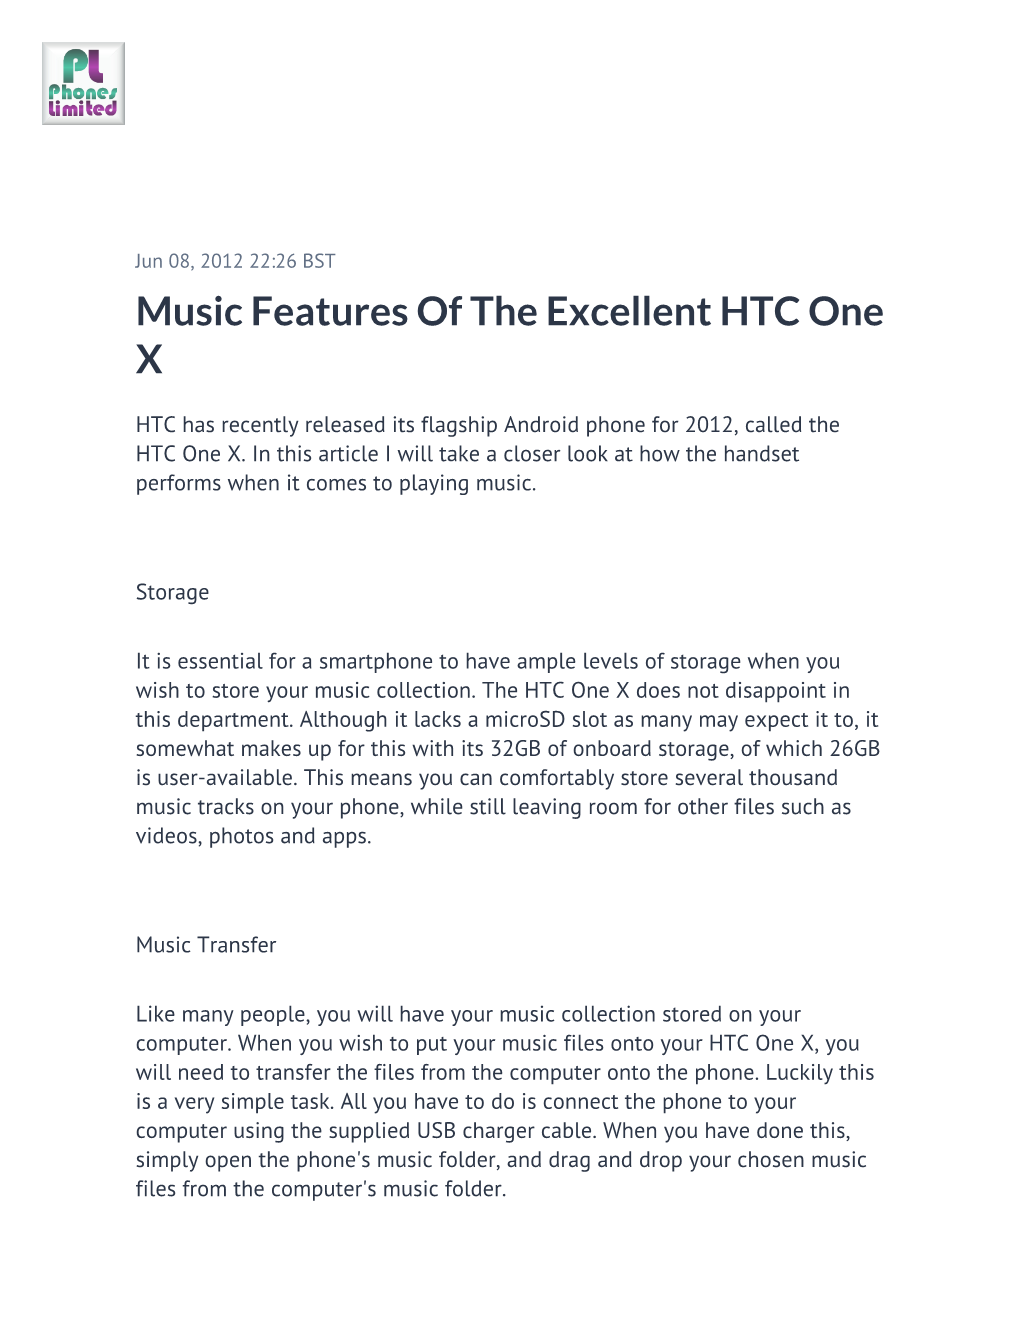 Music Features of the Excellent HTC One X